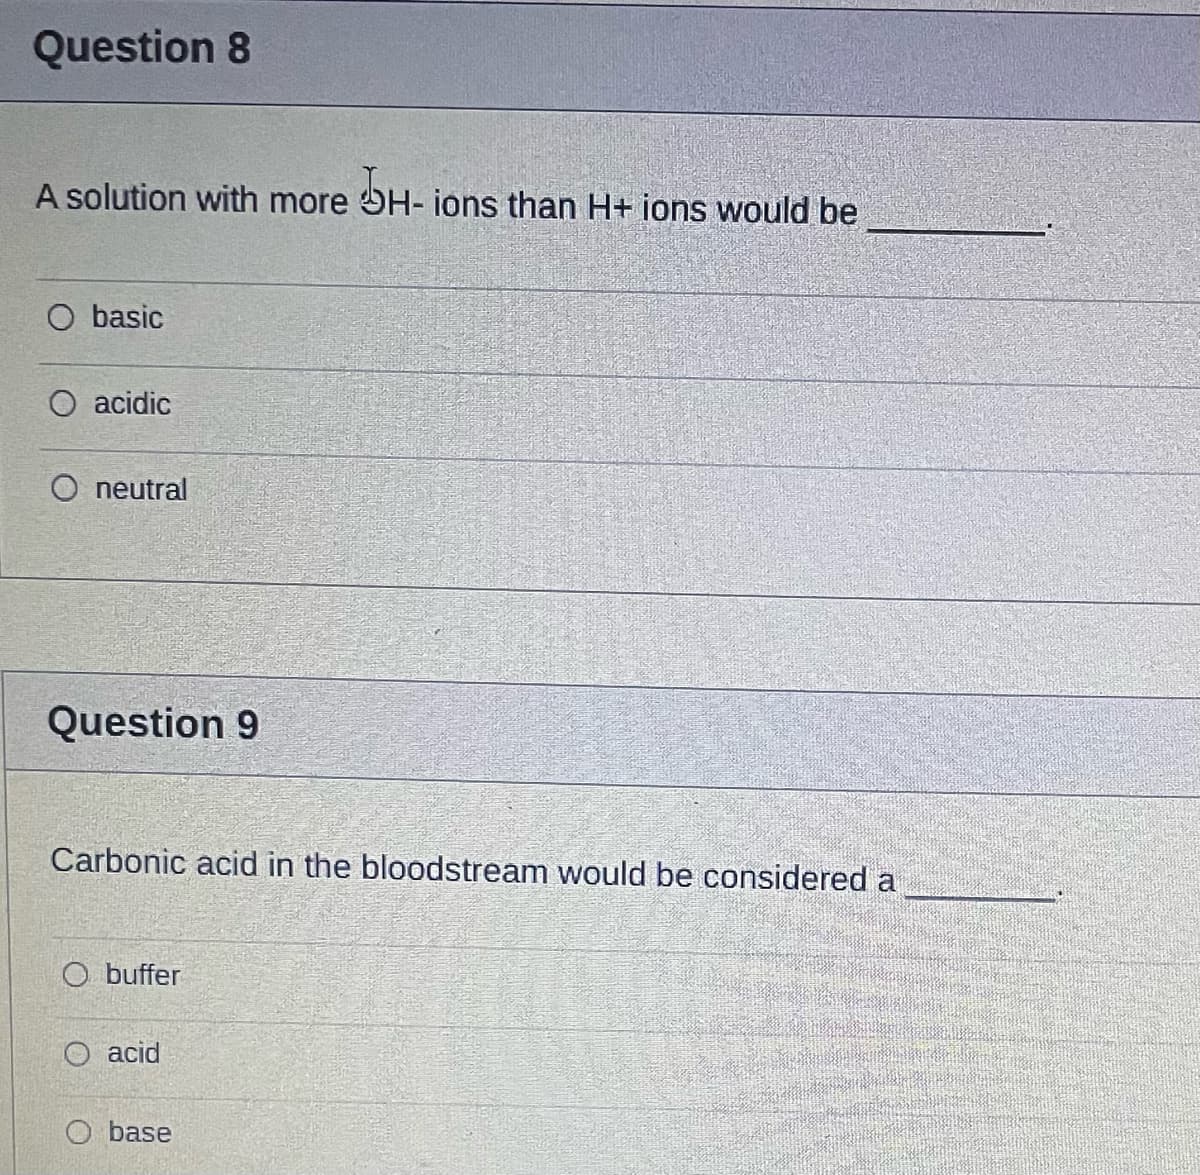 Question 8
A solution with more OH- ions than H+ ions would be
O basic
O acidic
O neutral
Question 9
Carbonic acid in the bloodstream would be considered a
O buffer
O acid
O base